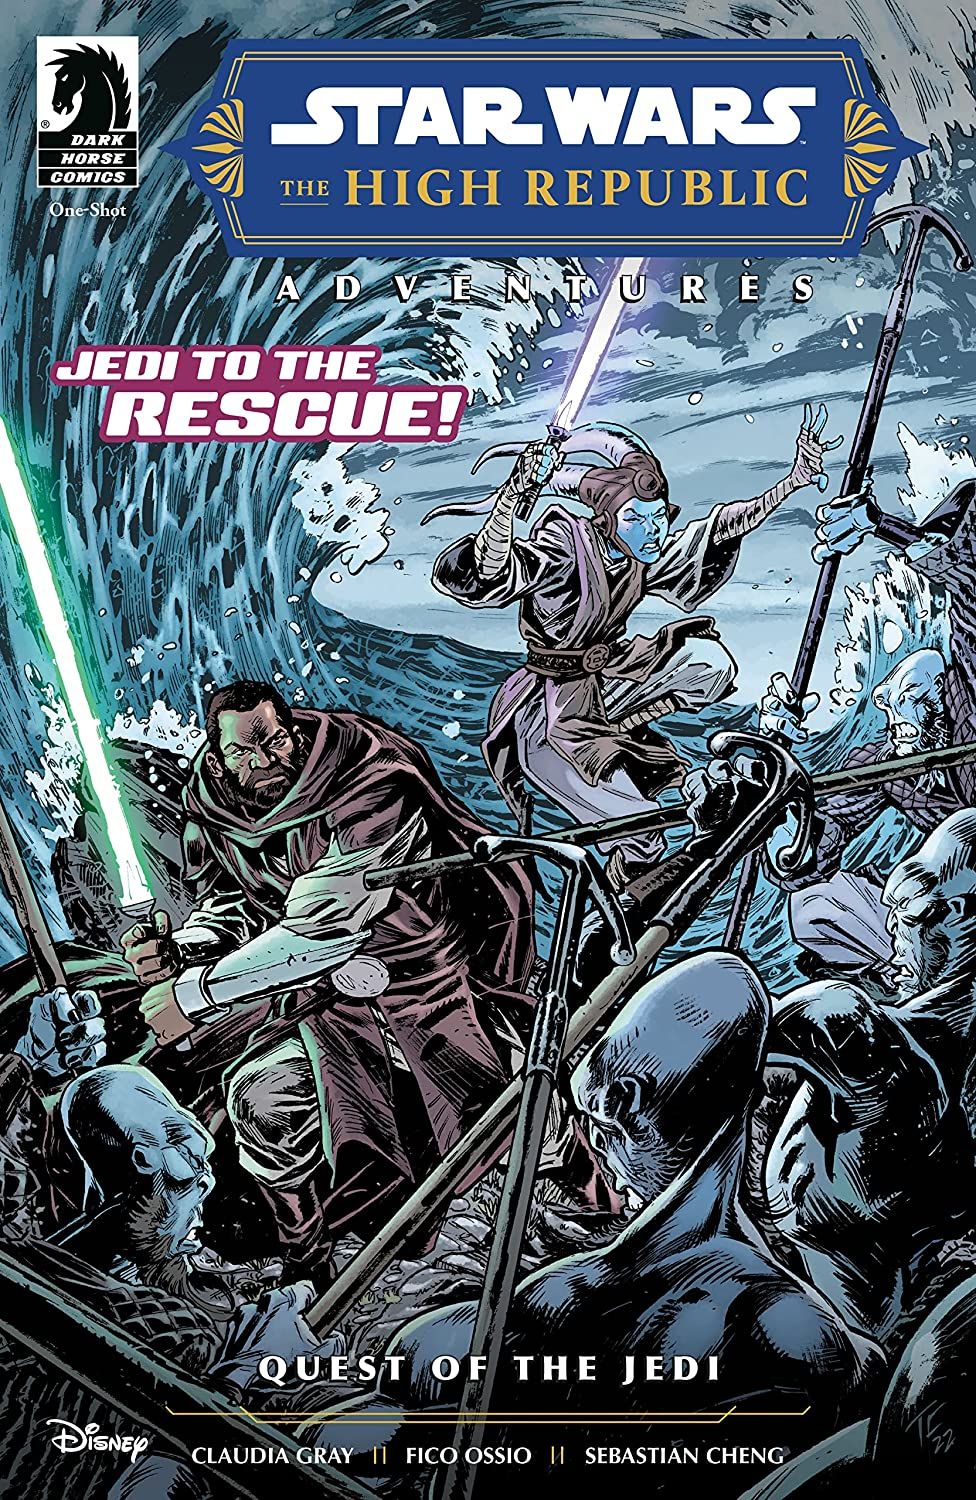 Barnabas Vim and Vix Fonnick have their lightsabers drawn on the cover of Star Wars: High Republic Adventures - Quest of the Jedi.